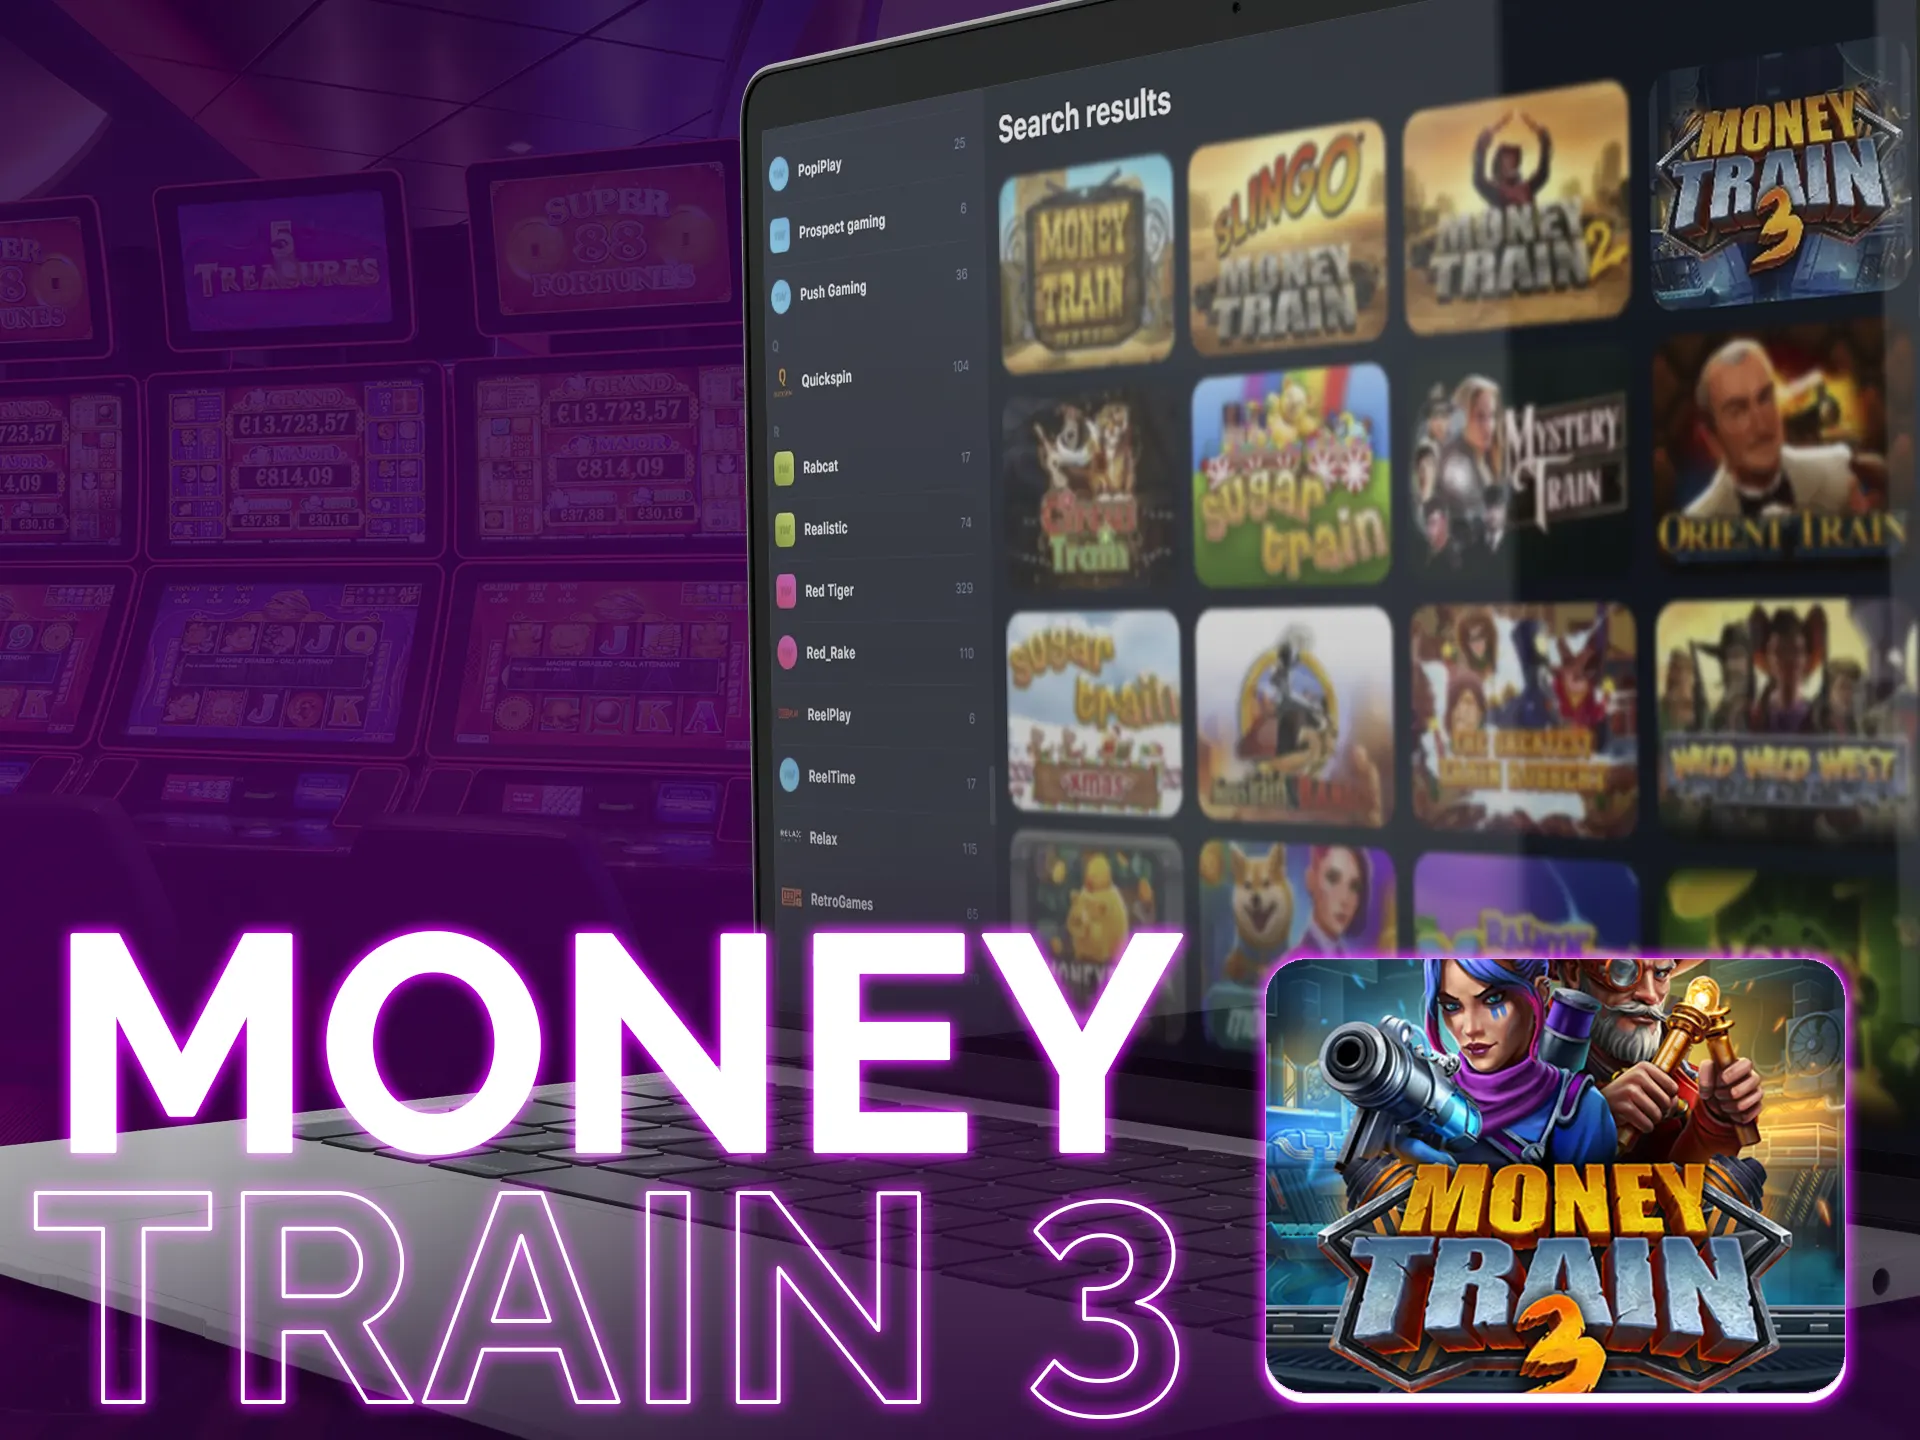 Money Train 3 is a cyberpunk-themed slot with robots, gems, and easy gameplay.